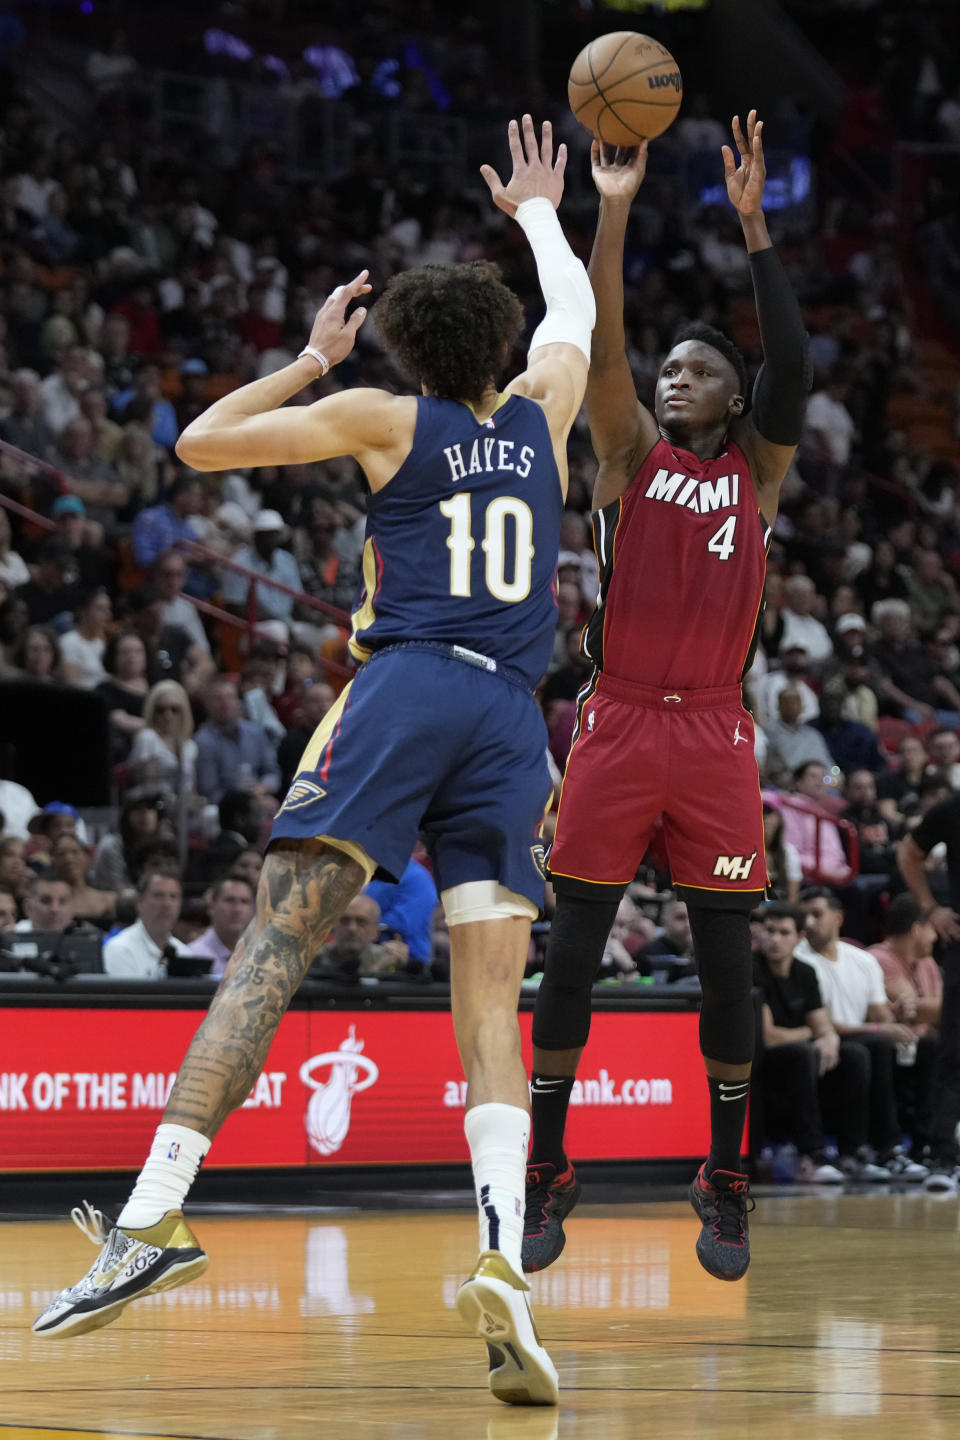 Miami Heat guard Victor Oladipo (4) takes a shot against New Orleans Pelicans center Jaxson Hayes (10) during the first half of an NBA basketball game, Sunday, Jan. 22, 2023, in Miami. (AP Photo/Wilfredo Lee)